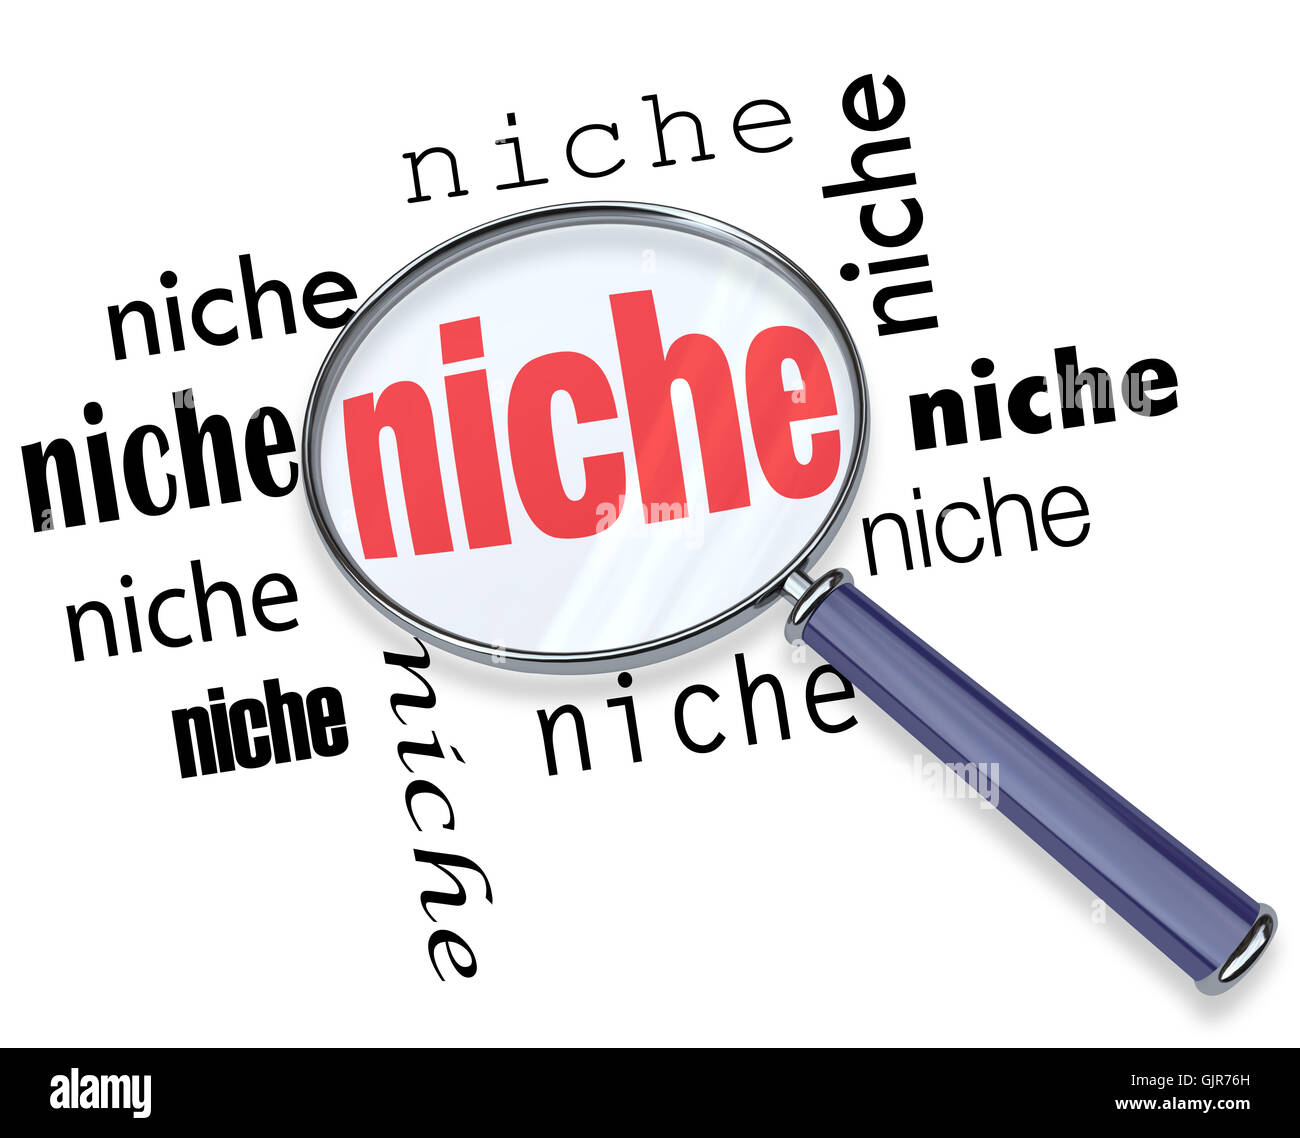 Finding a Targeted Niche - Magnifying Glass Stock Photo